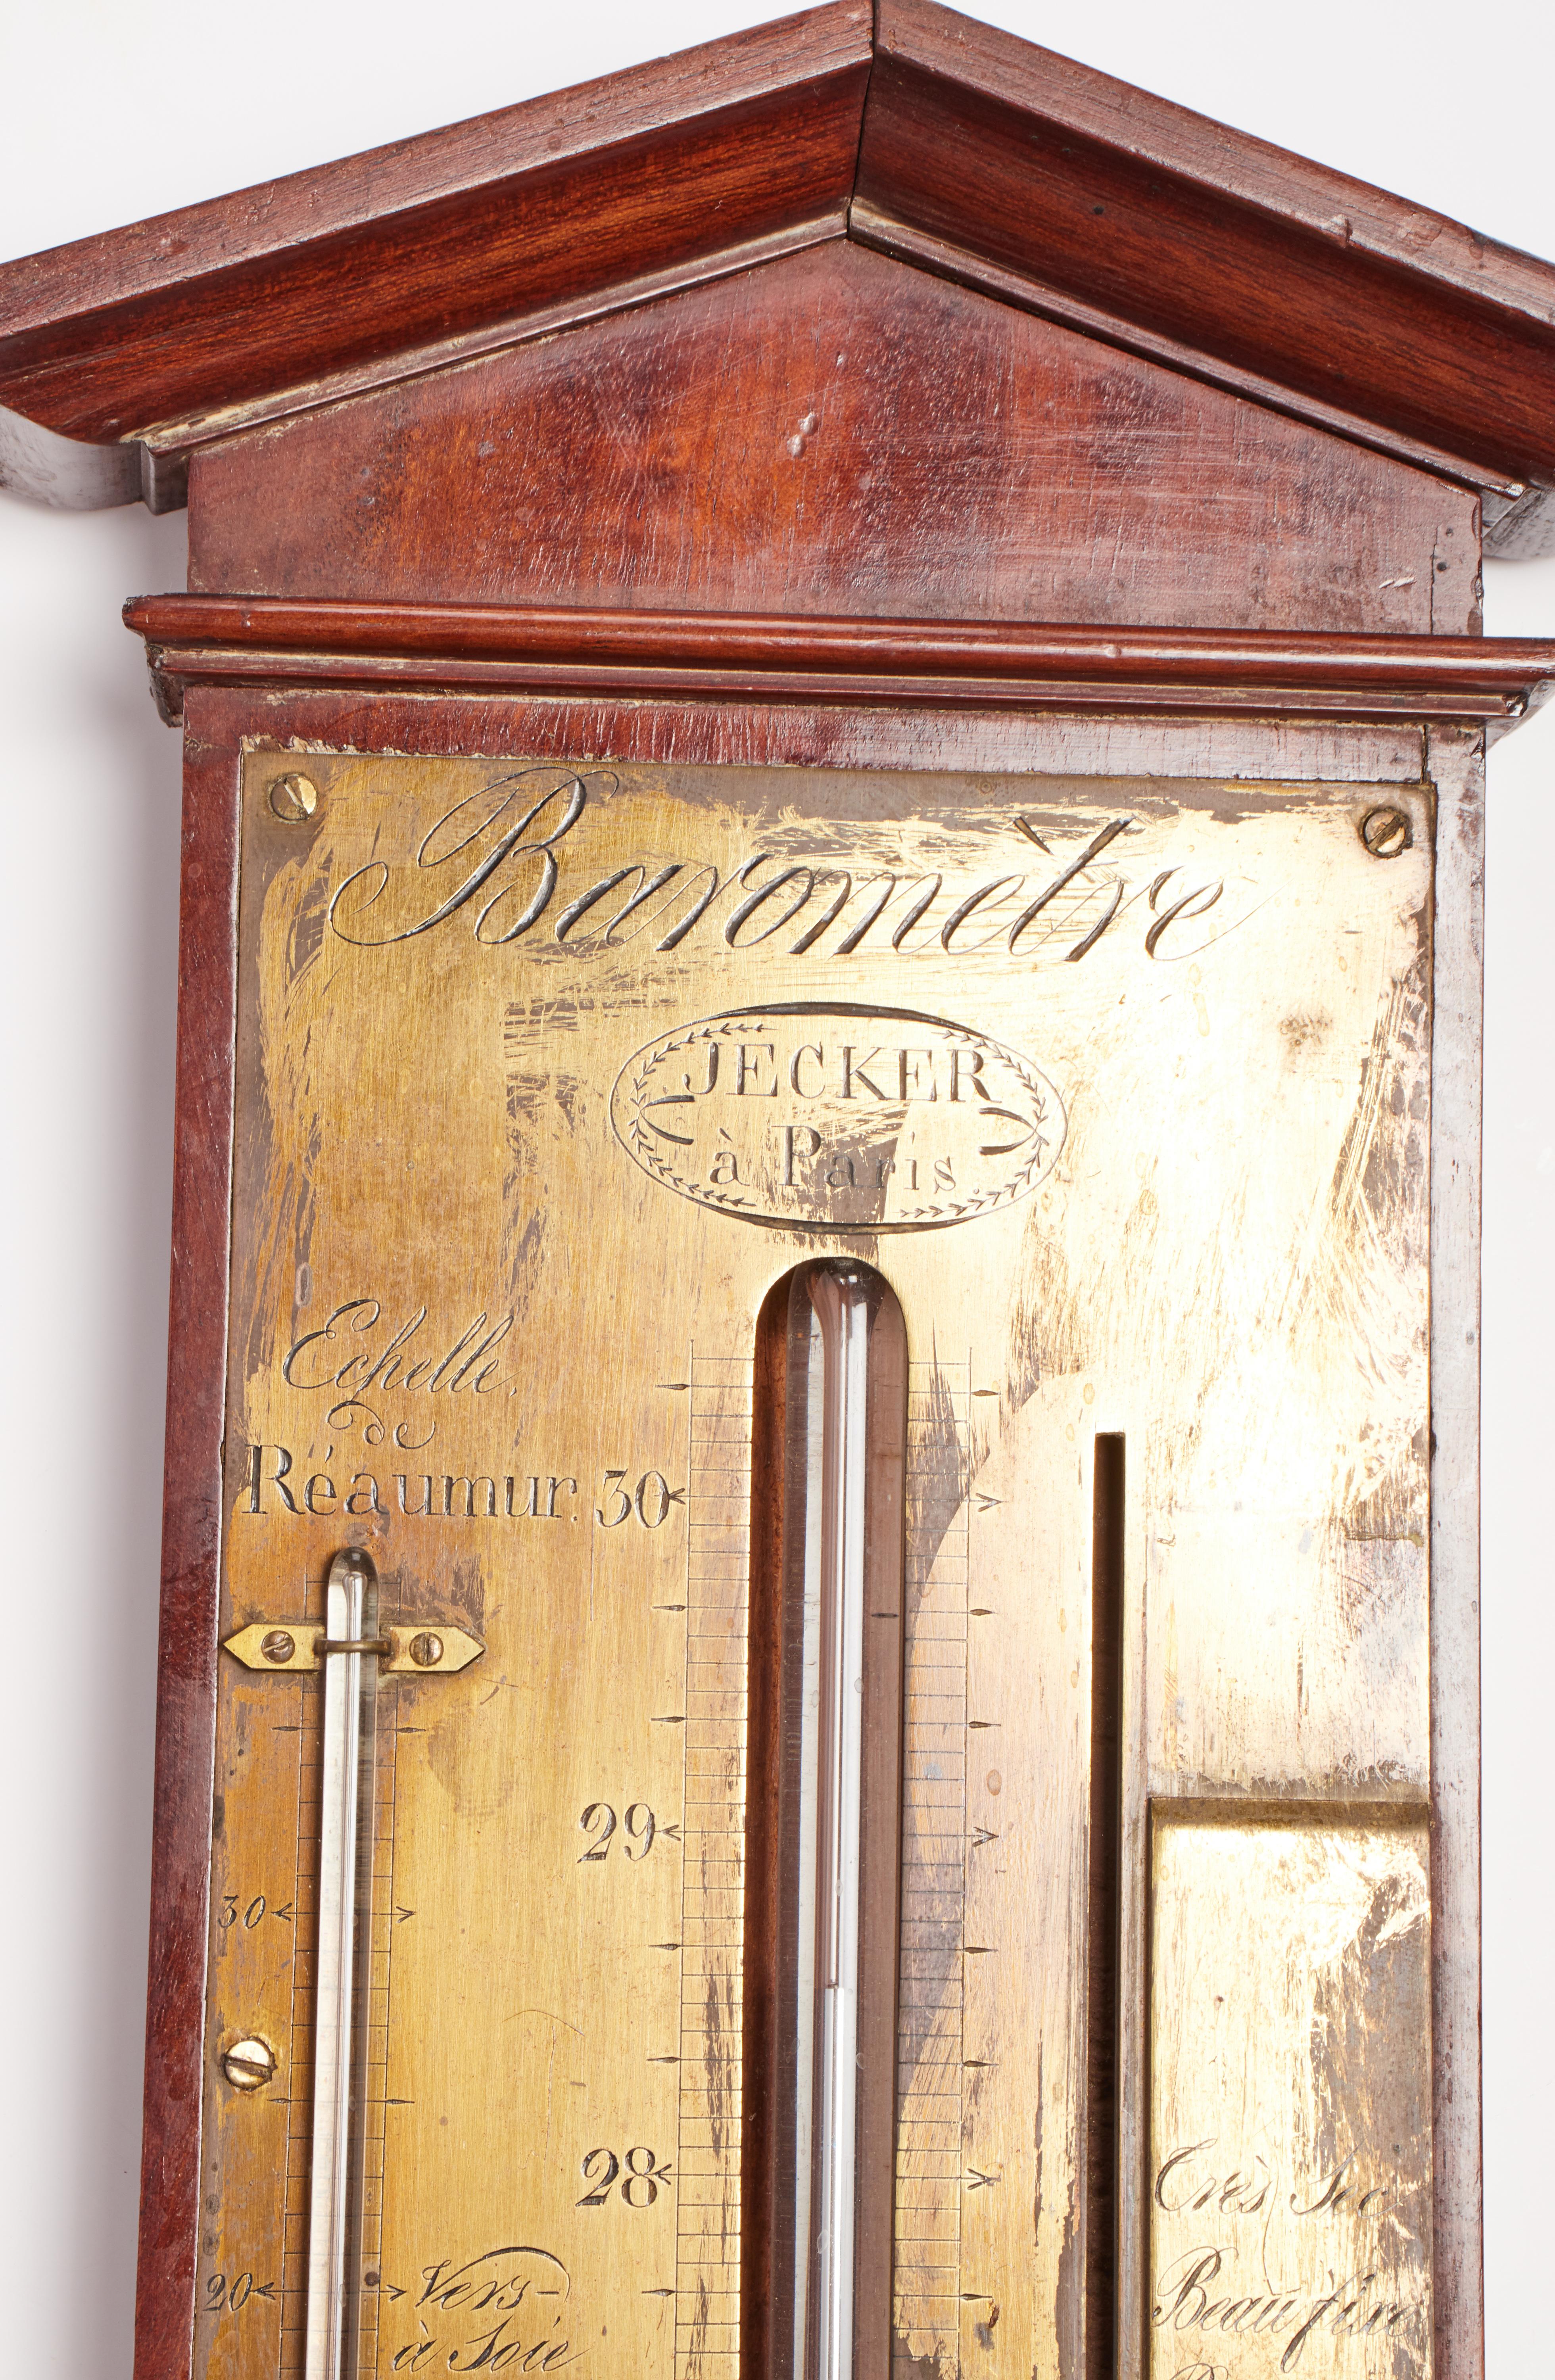 French Barometer Signed Jecker, Paris 1800 For Sale